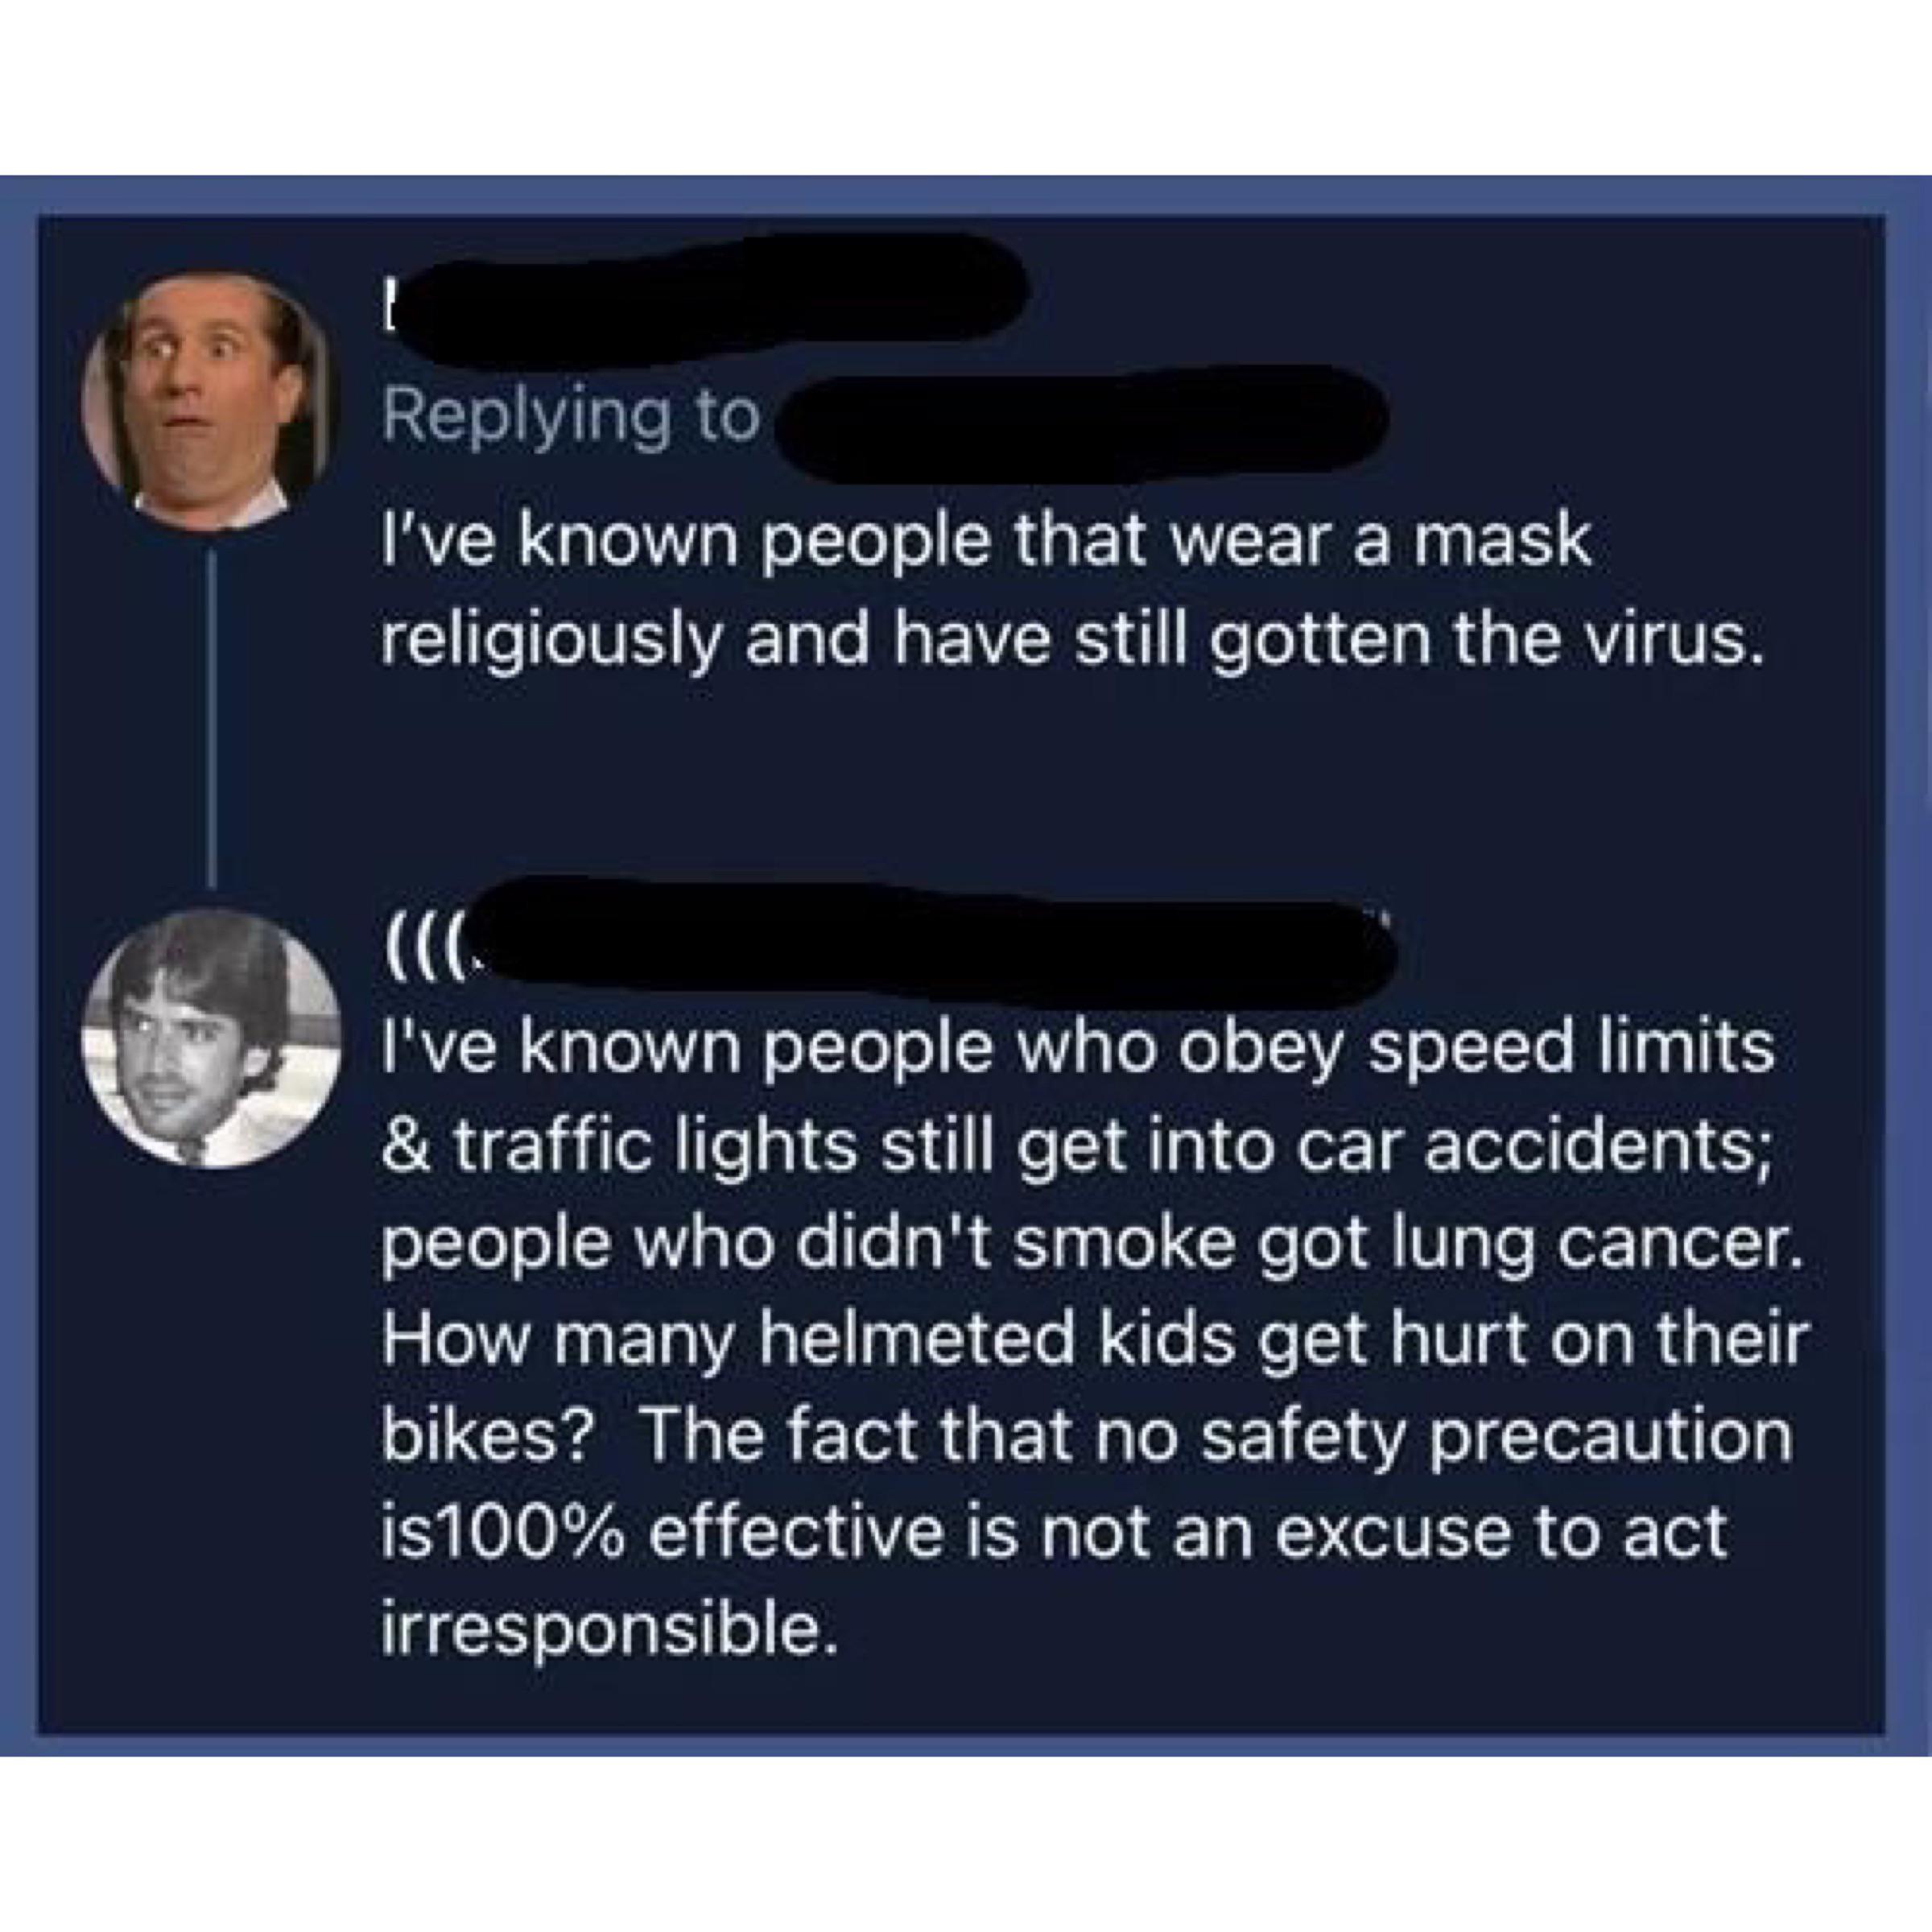 reddit facepalm - material - I've known people that wear a mask religiously and have still gotten the virus. . I've known people who obey speed limits & traffic lights still get into car accidents; people who didn't smoke got lung cancer. How many helmete